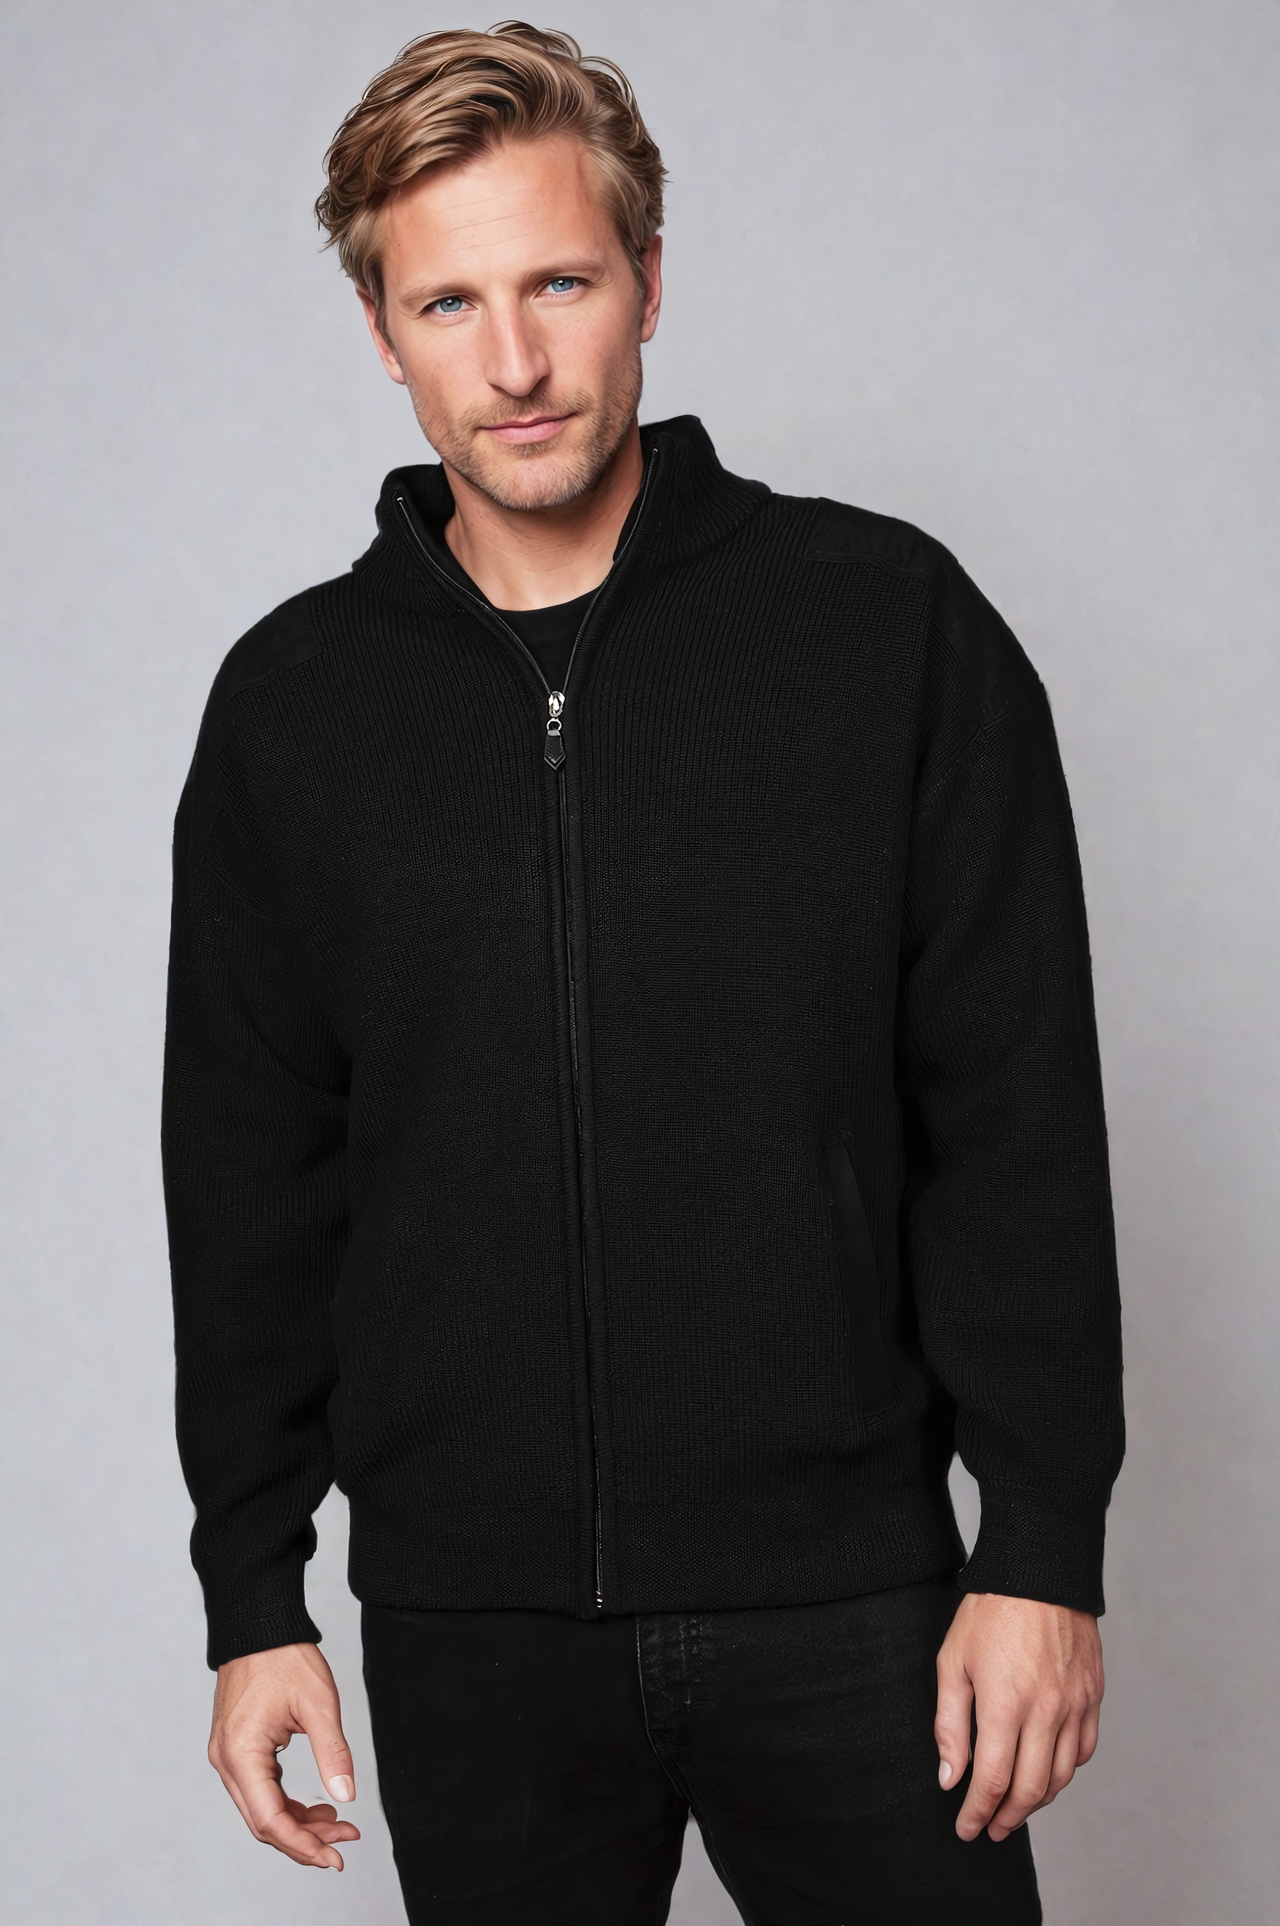 Ansett Wool Black Zip Jacket With Black Elbow And Shoulder Patches